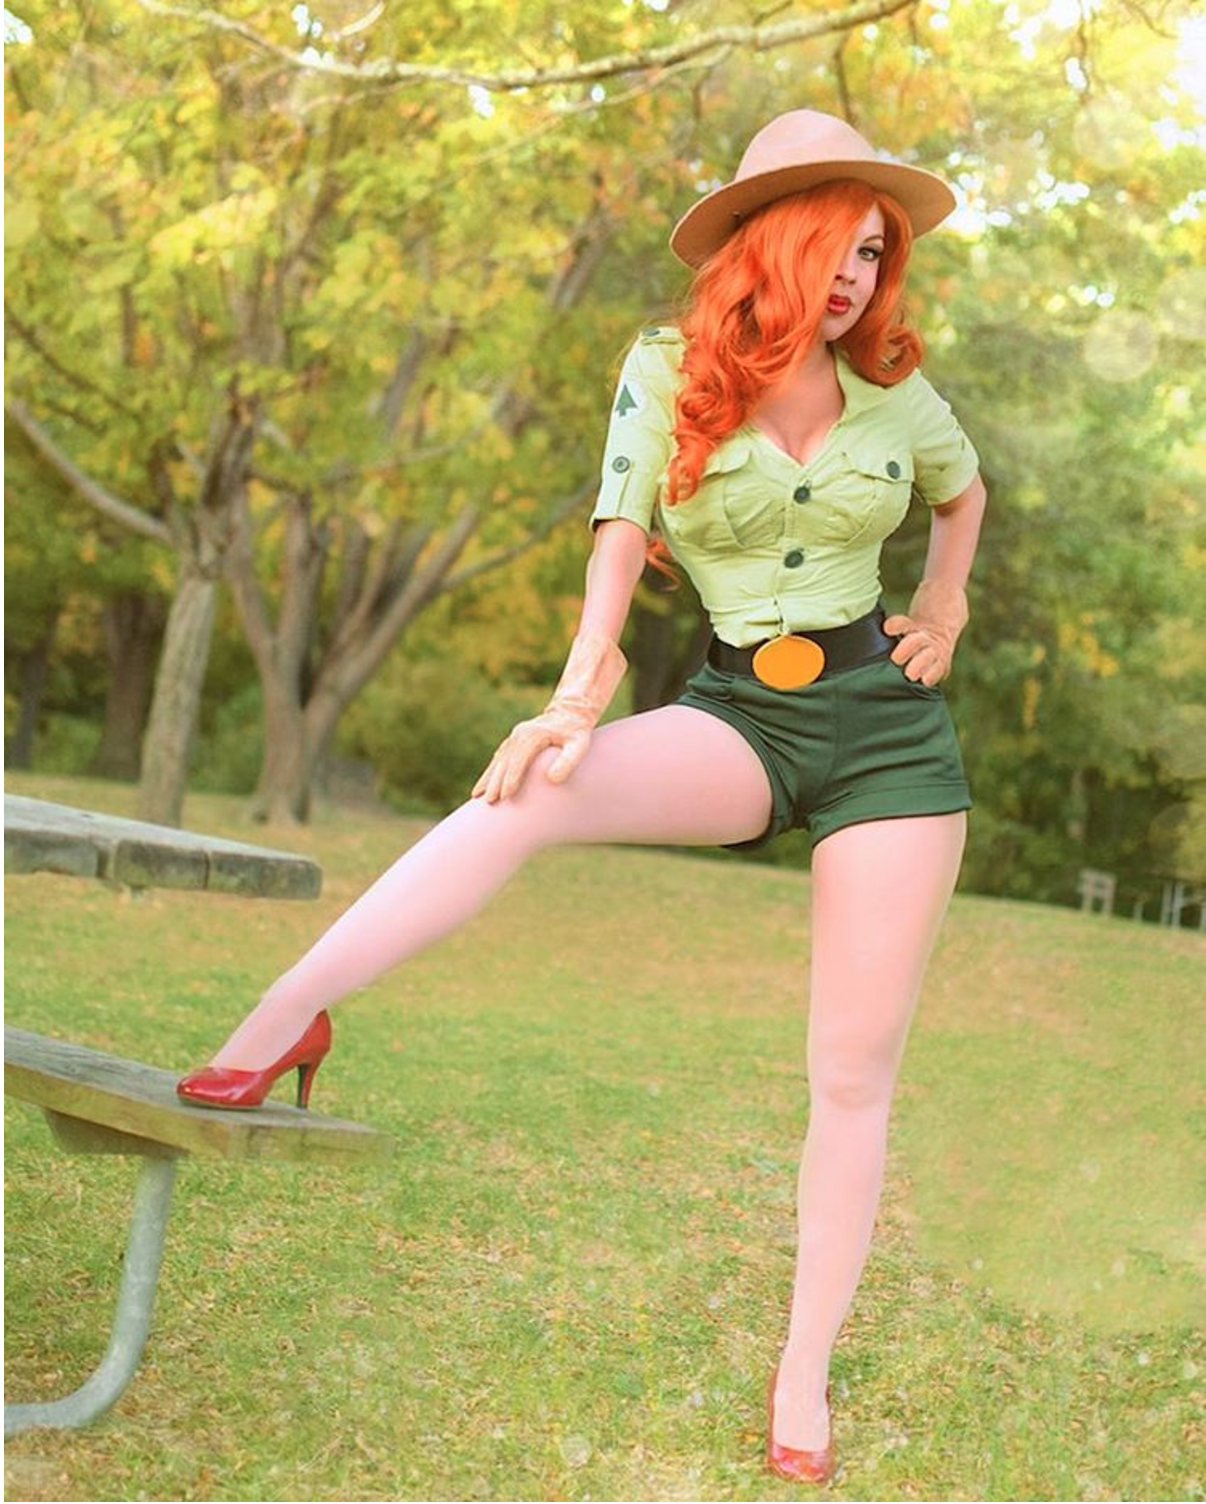 Introducing you fine folks to cosplayer. dressed as the "Park Ranger&q...